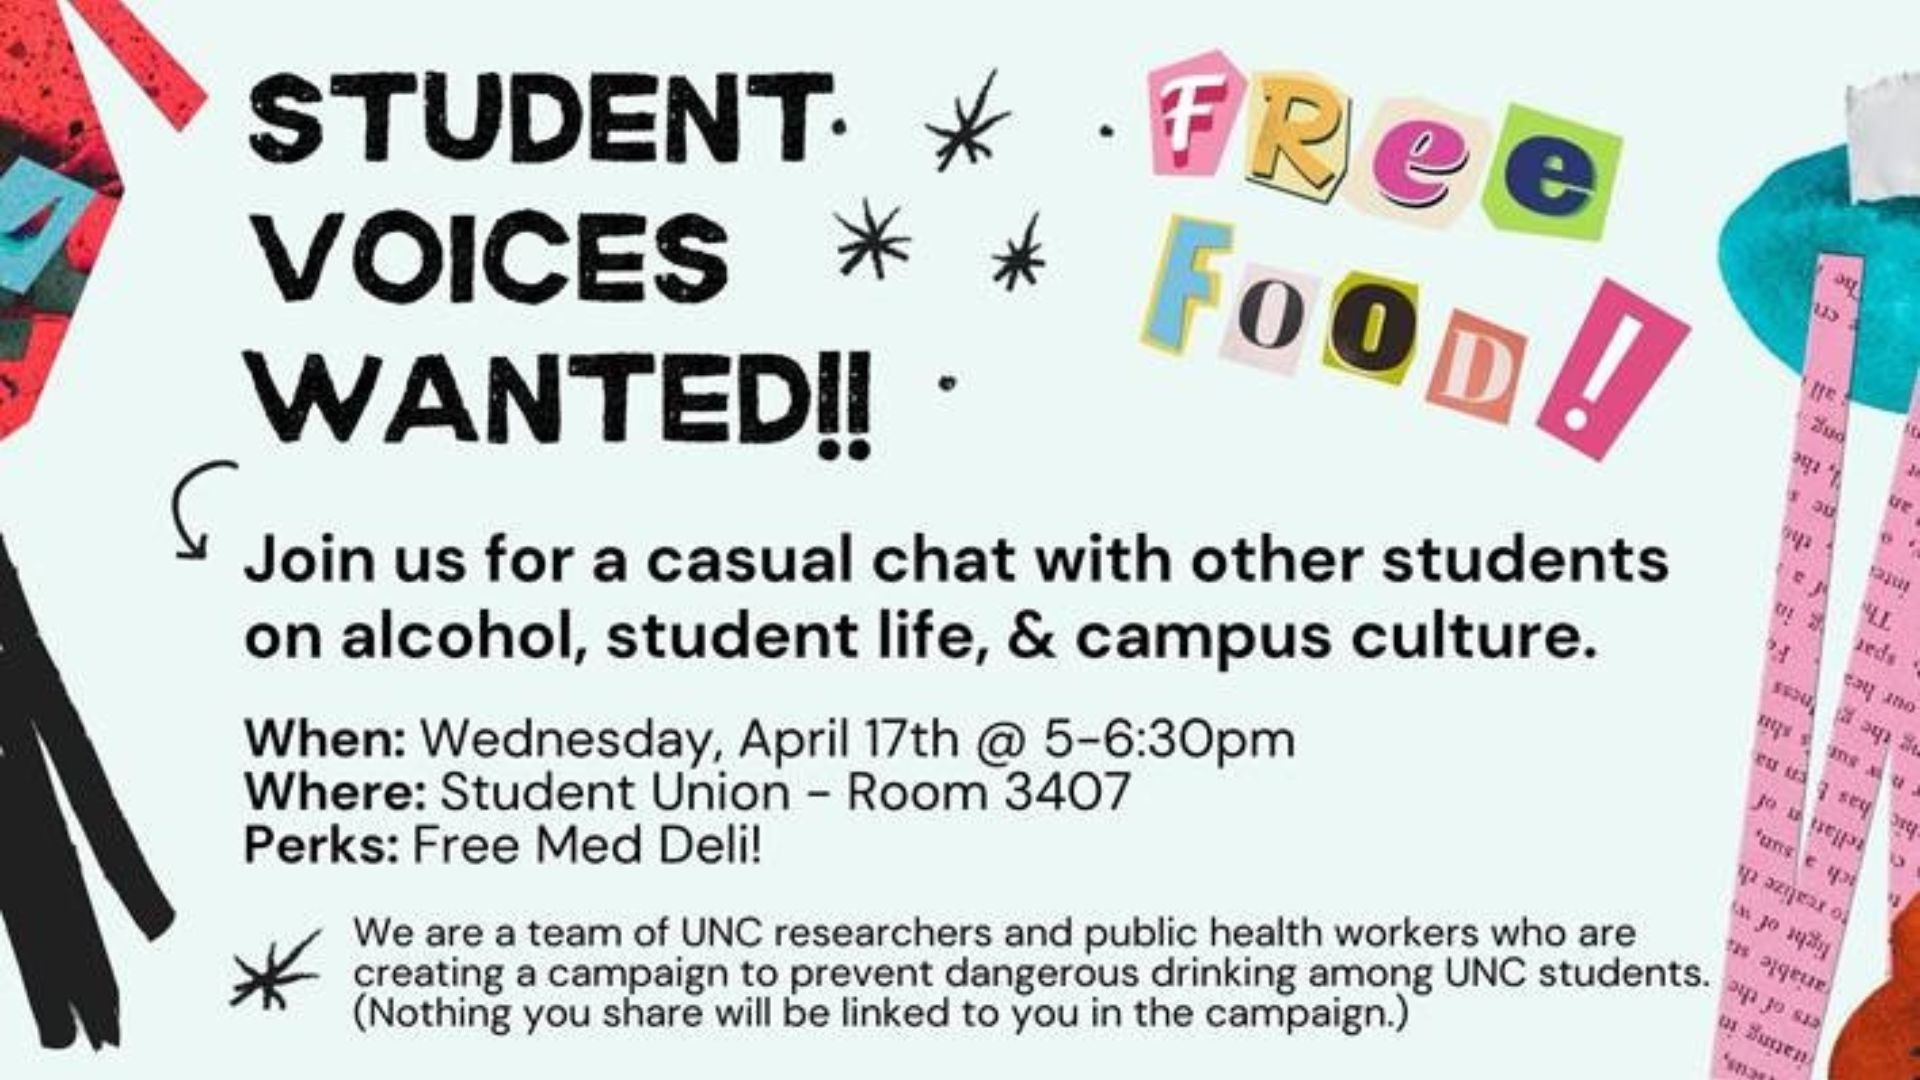 Student Voices Wanted